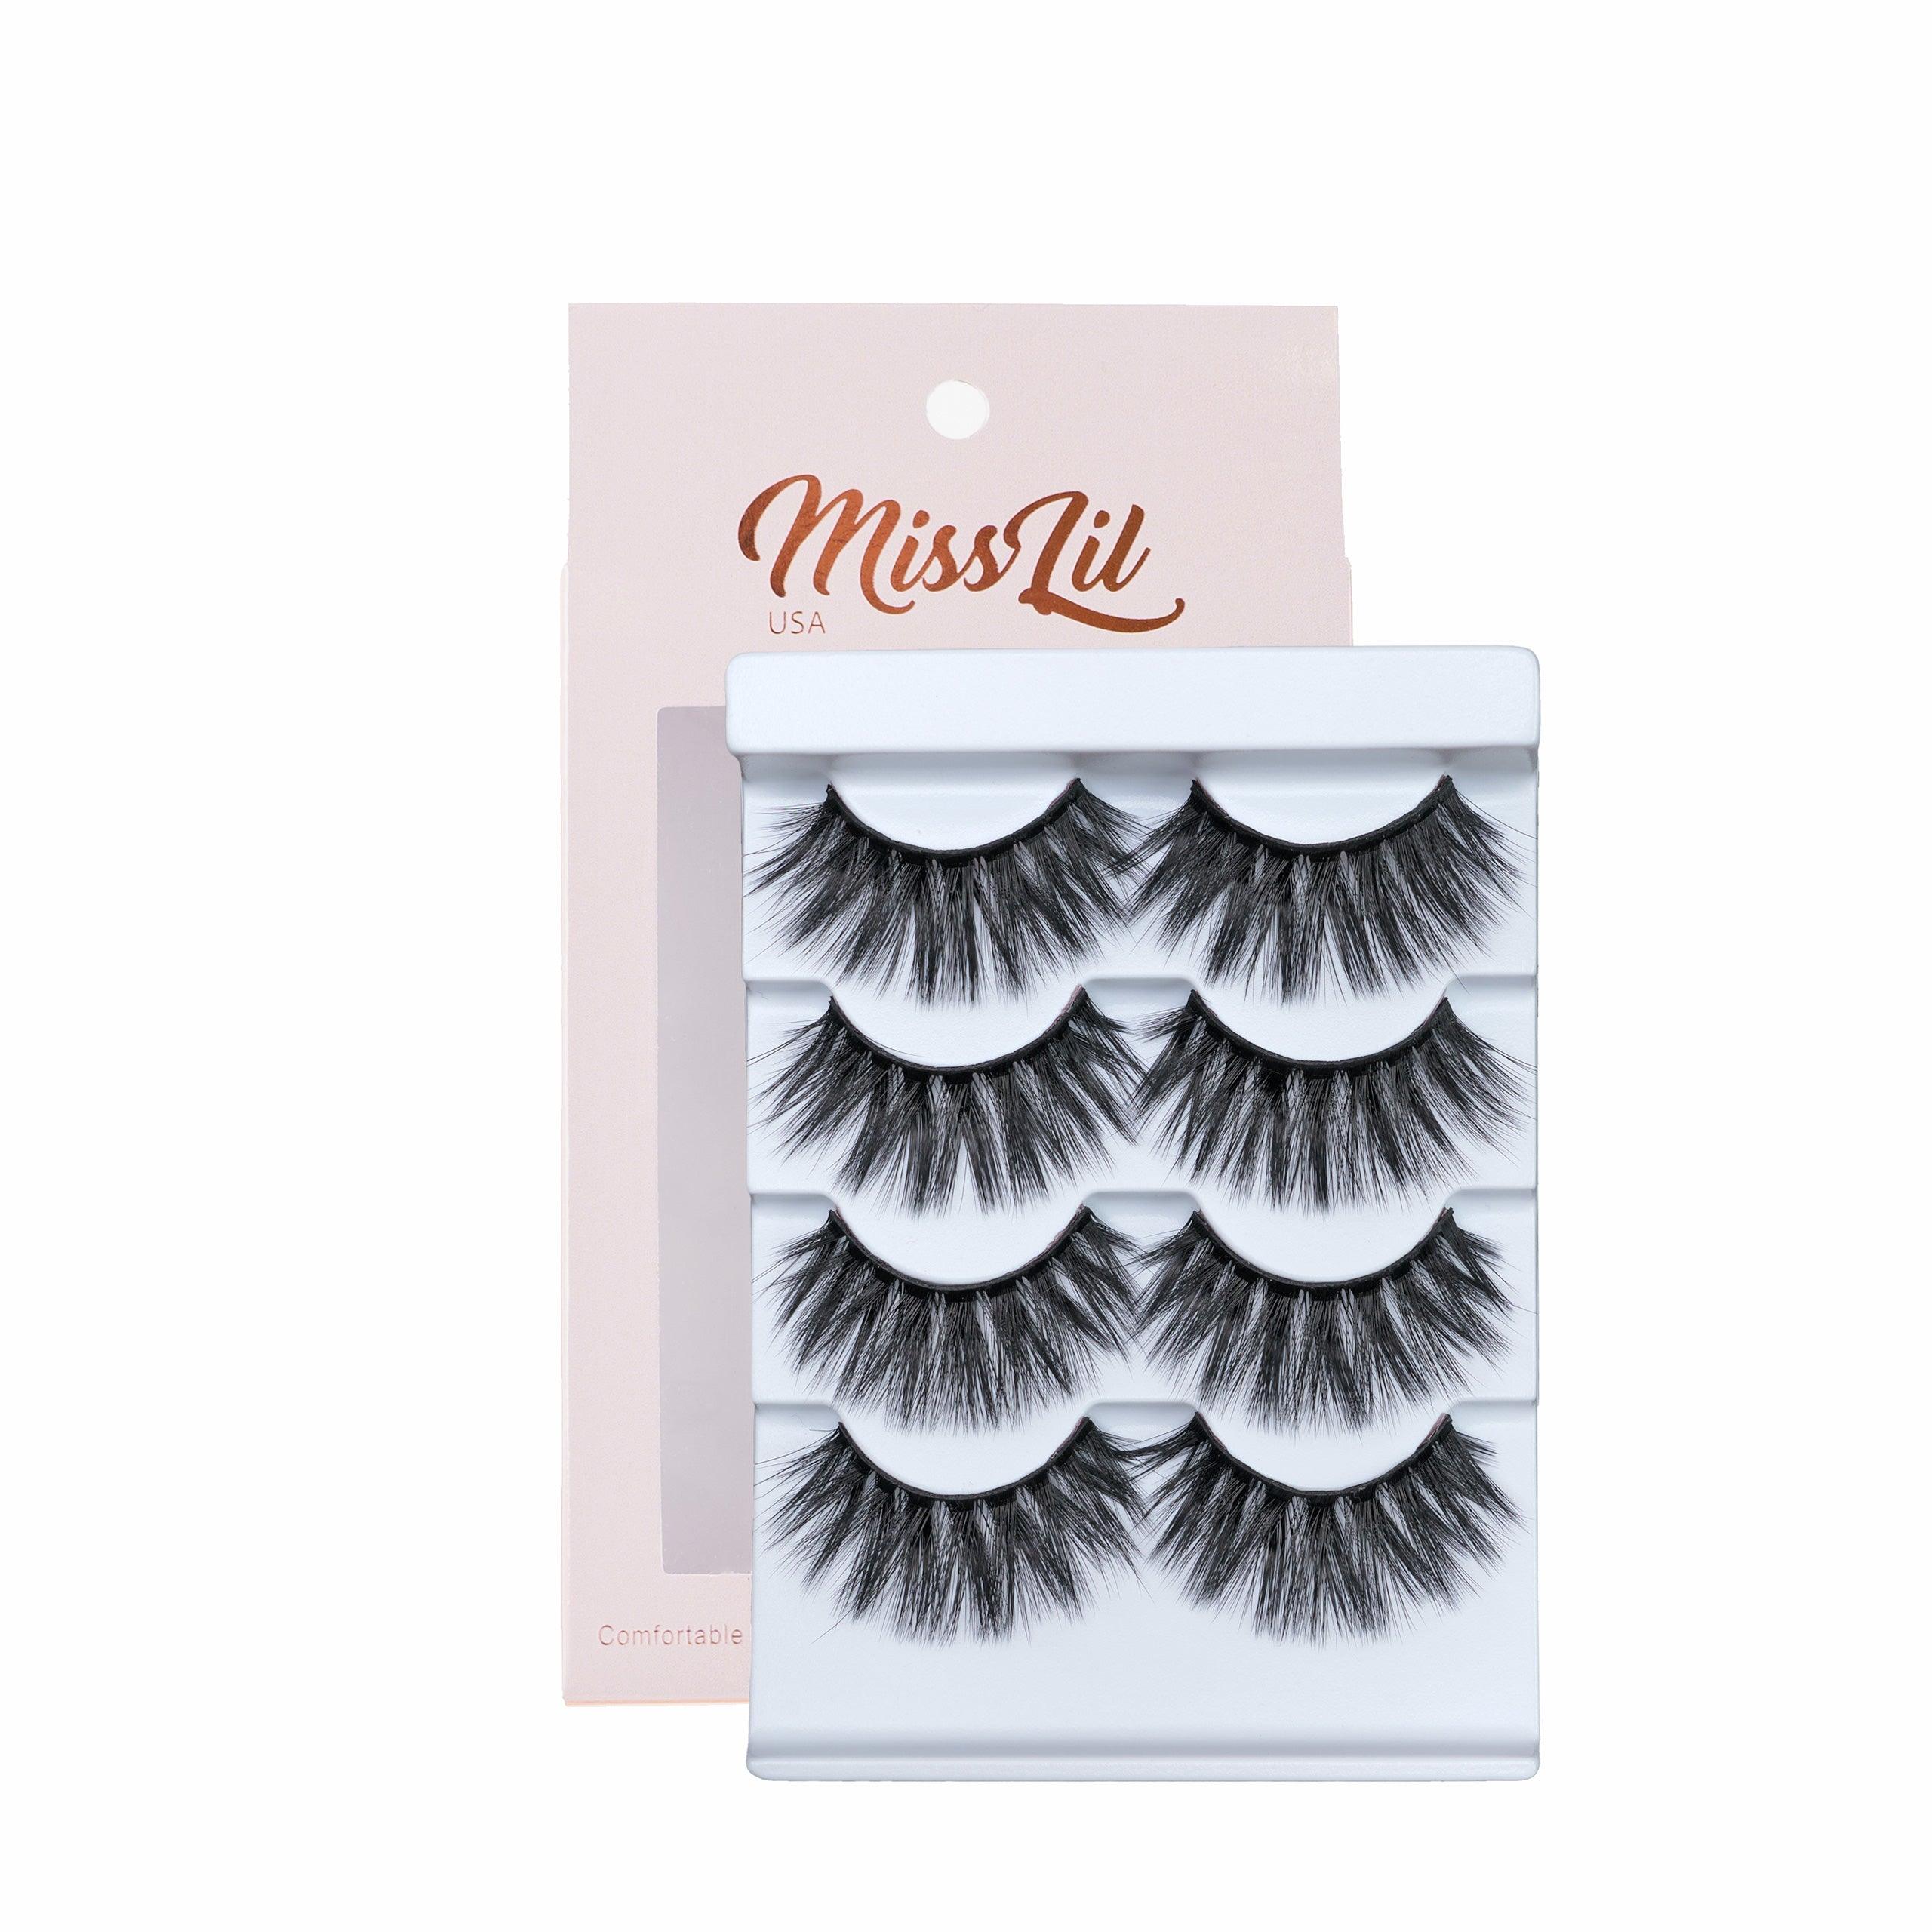 4 Pairs Lashes - Classic Collection #17 - Miss Lil USA